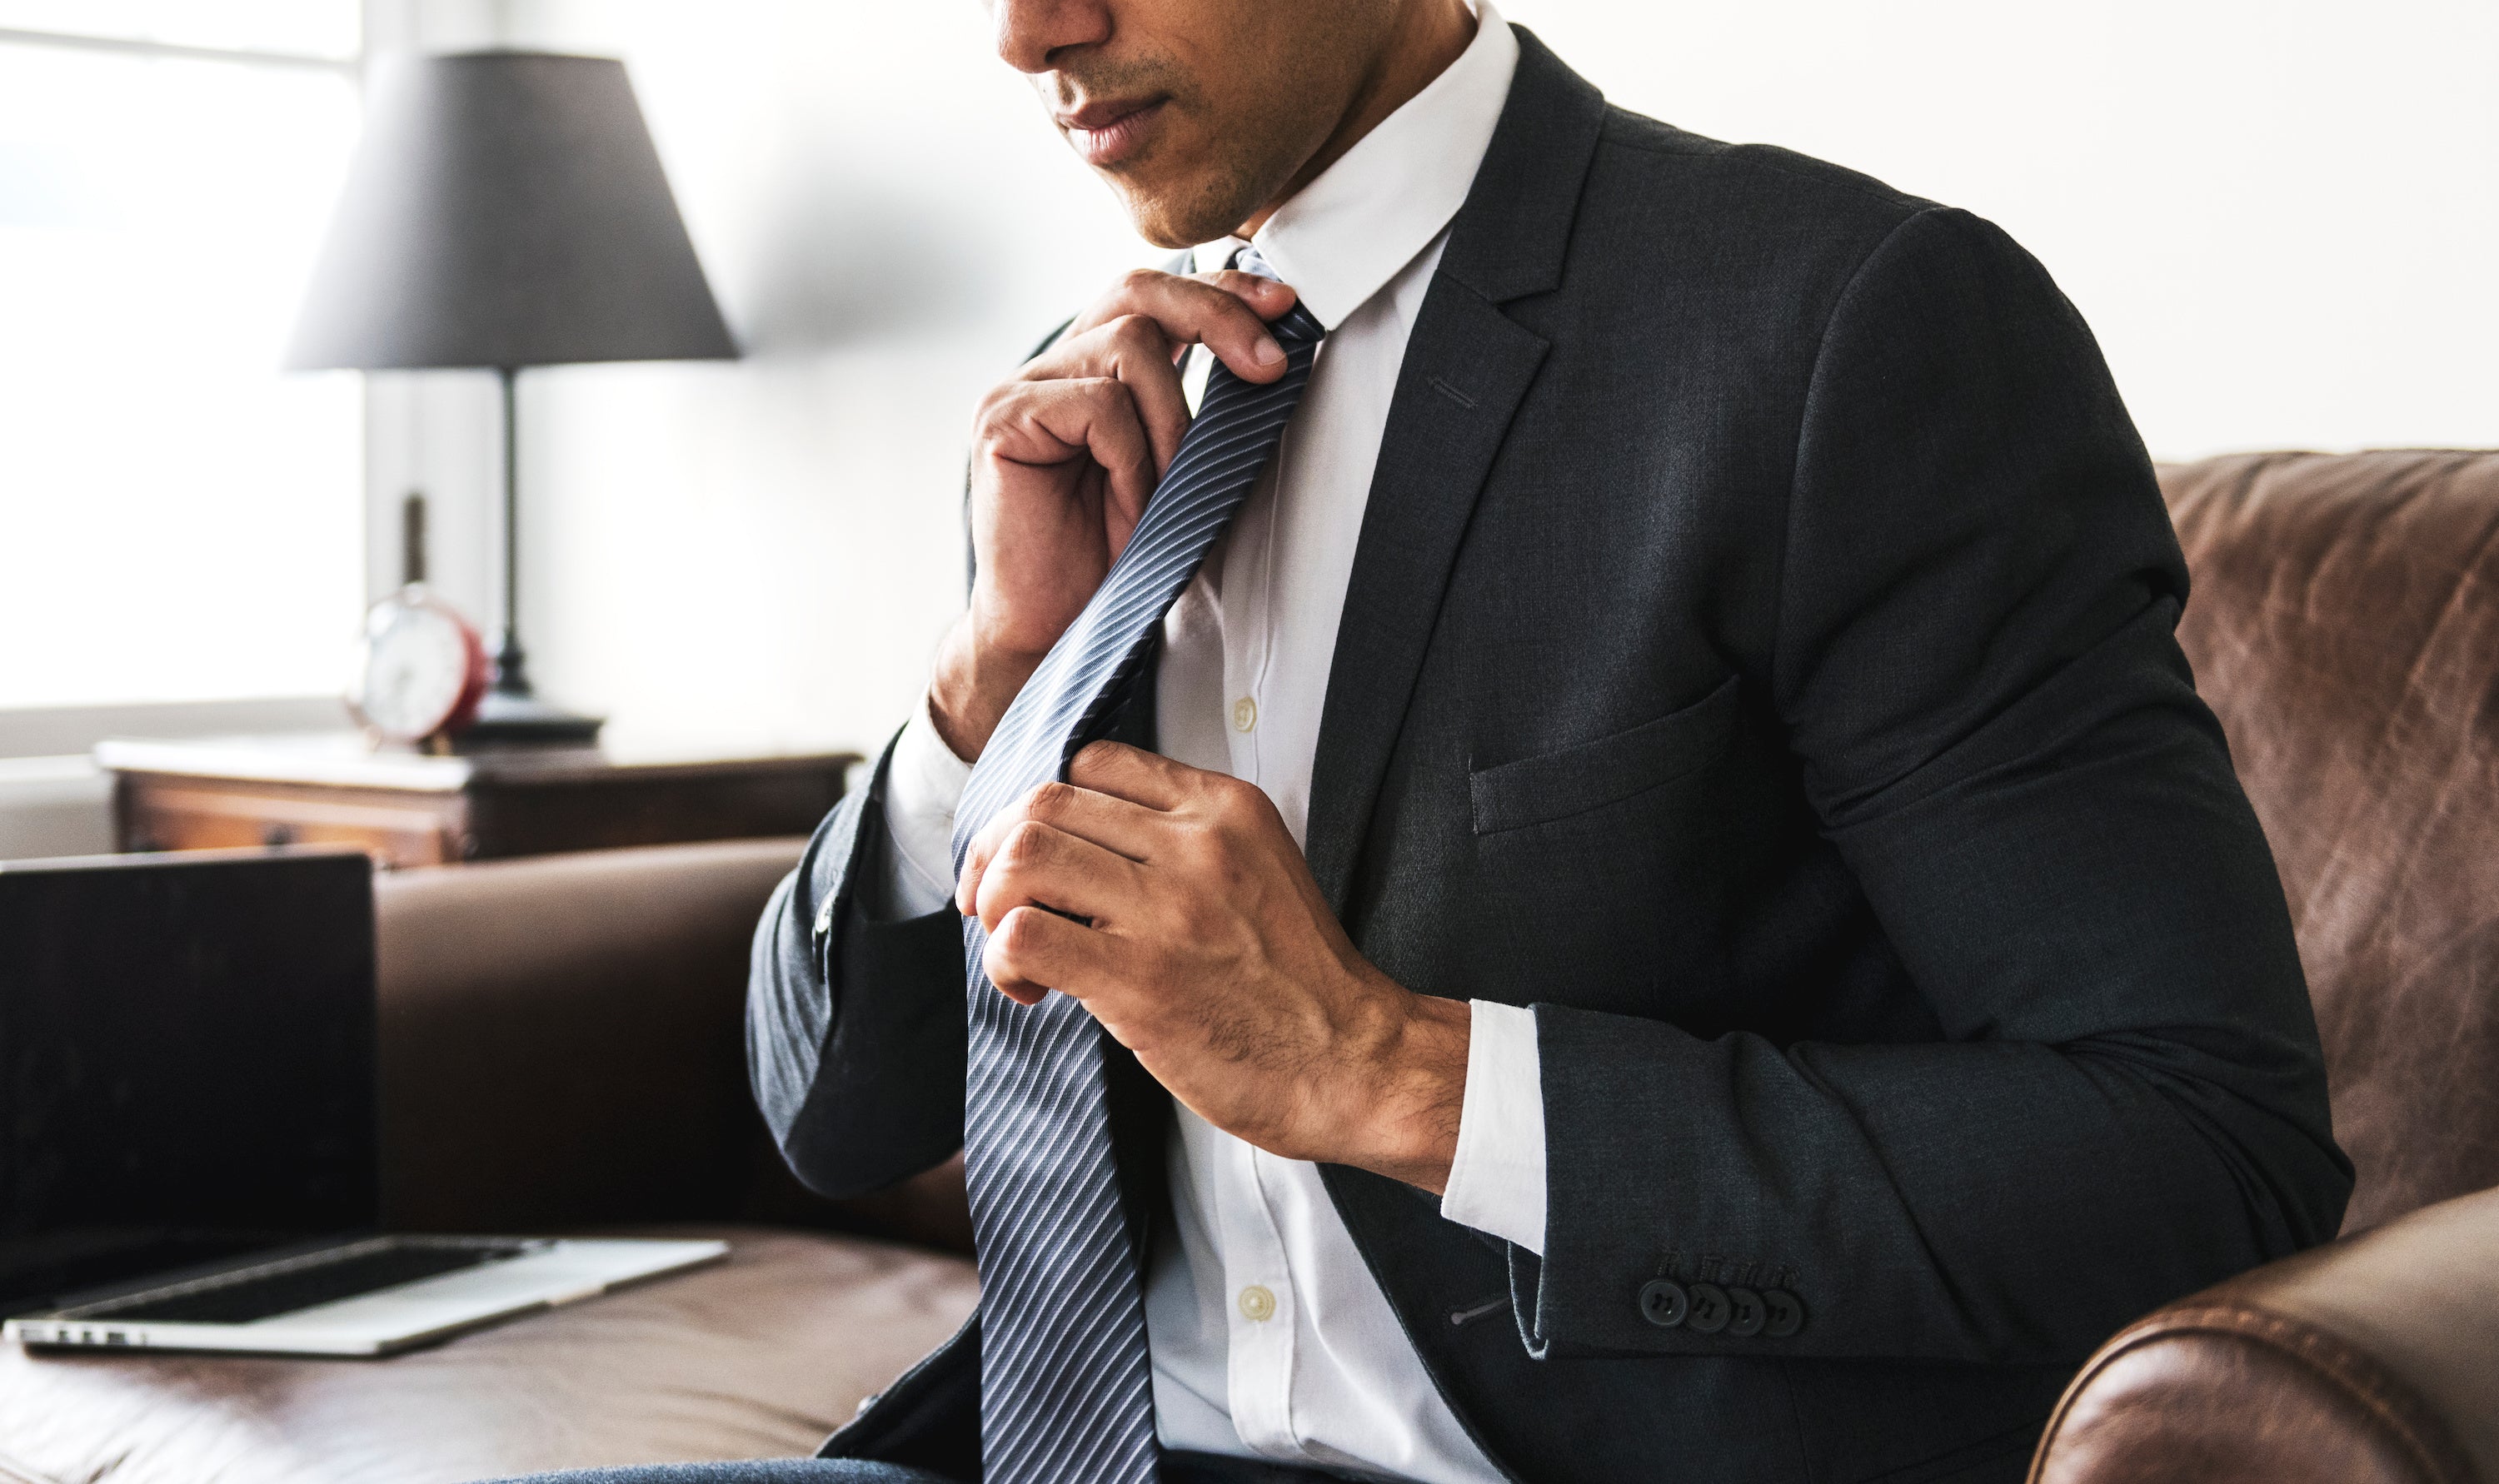 Clip-On Ties: Benefits, Uses, & More | PRIME Neckwear